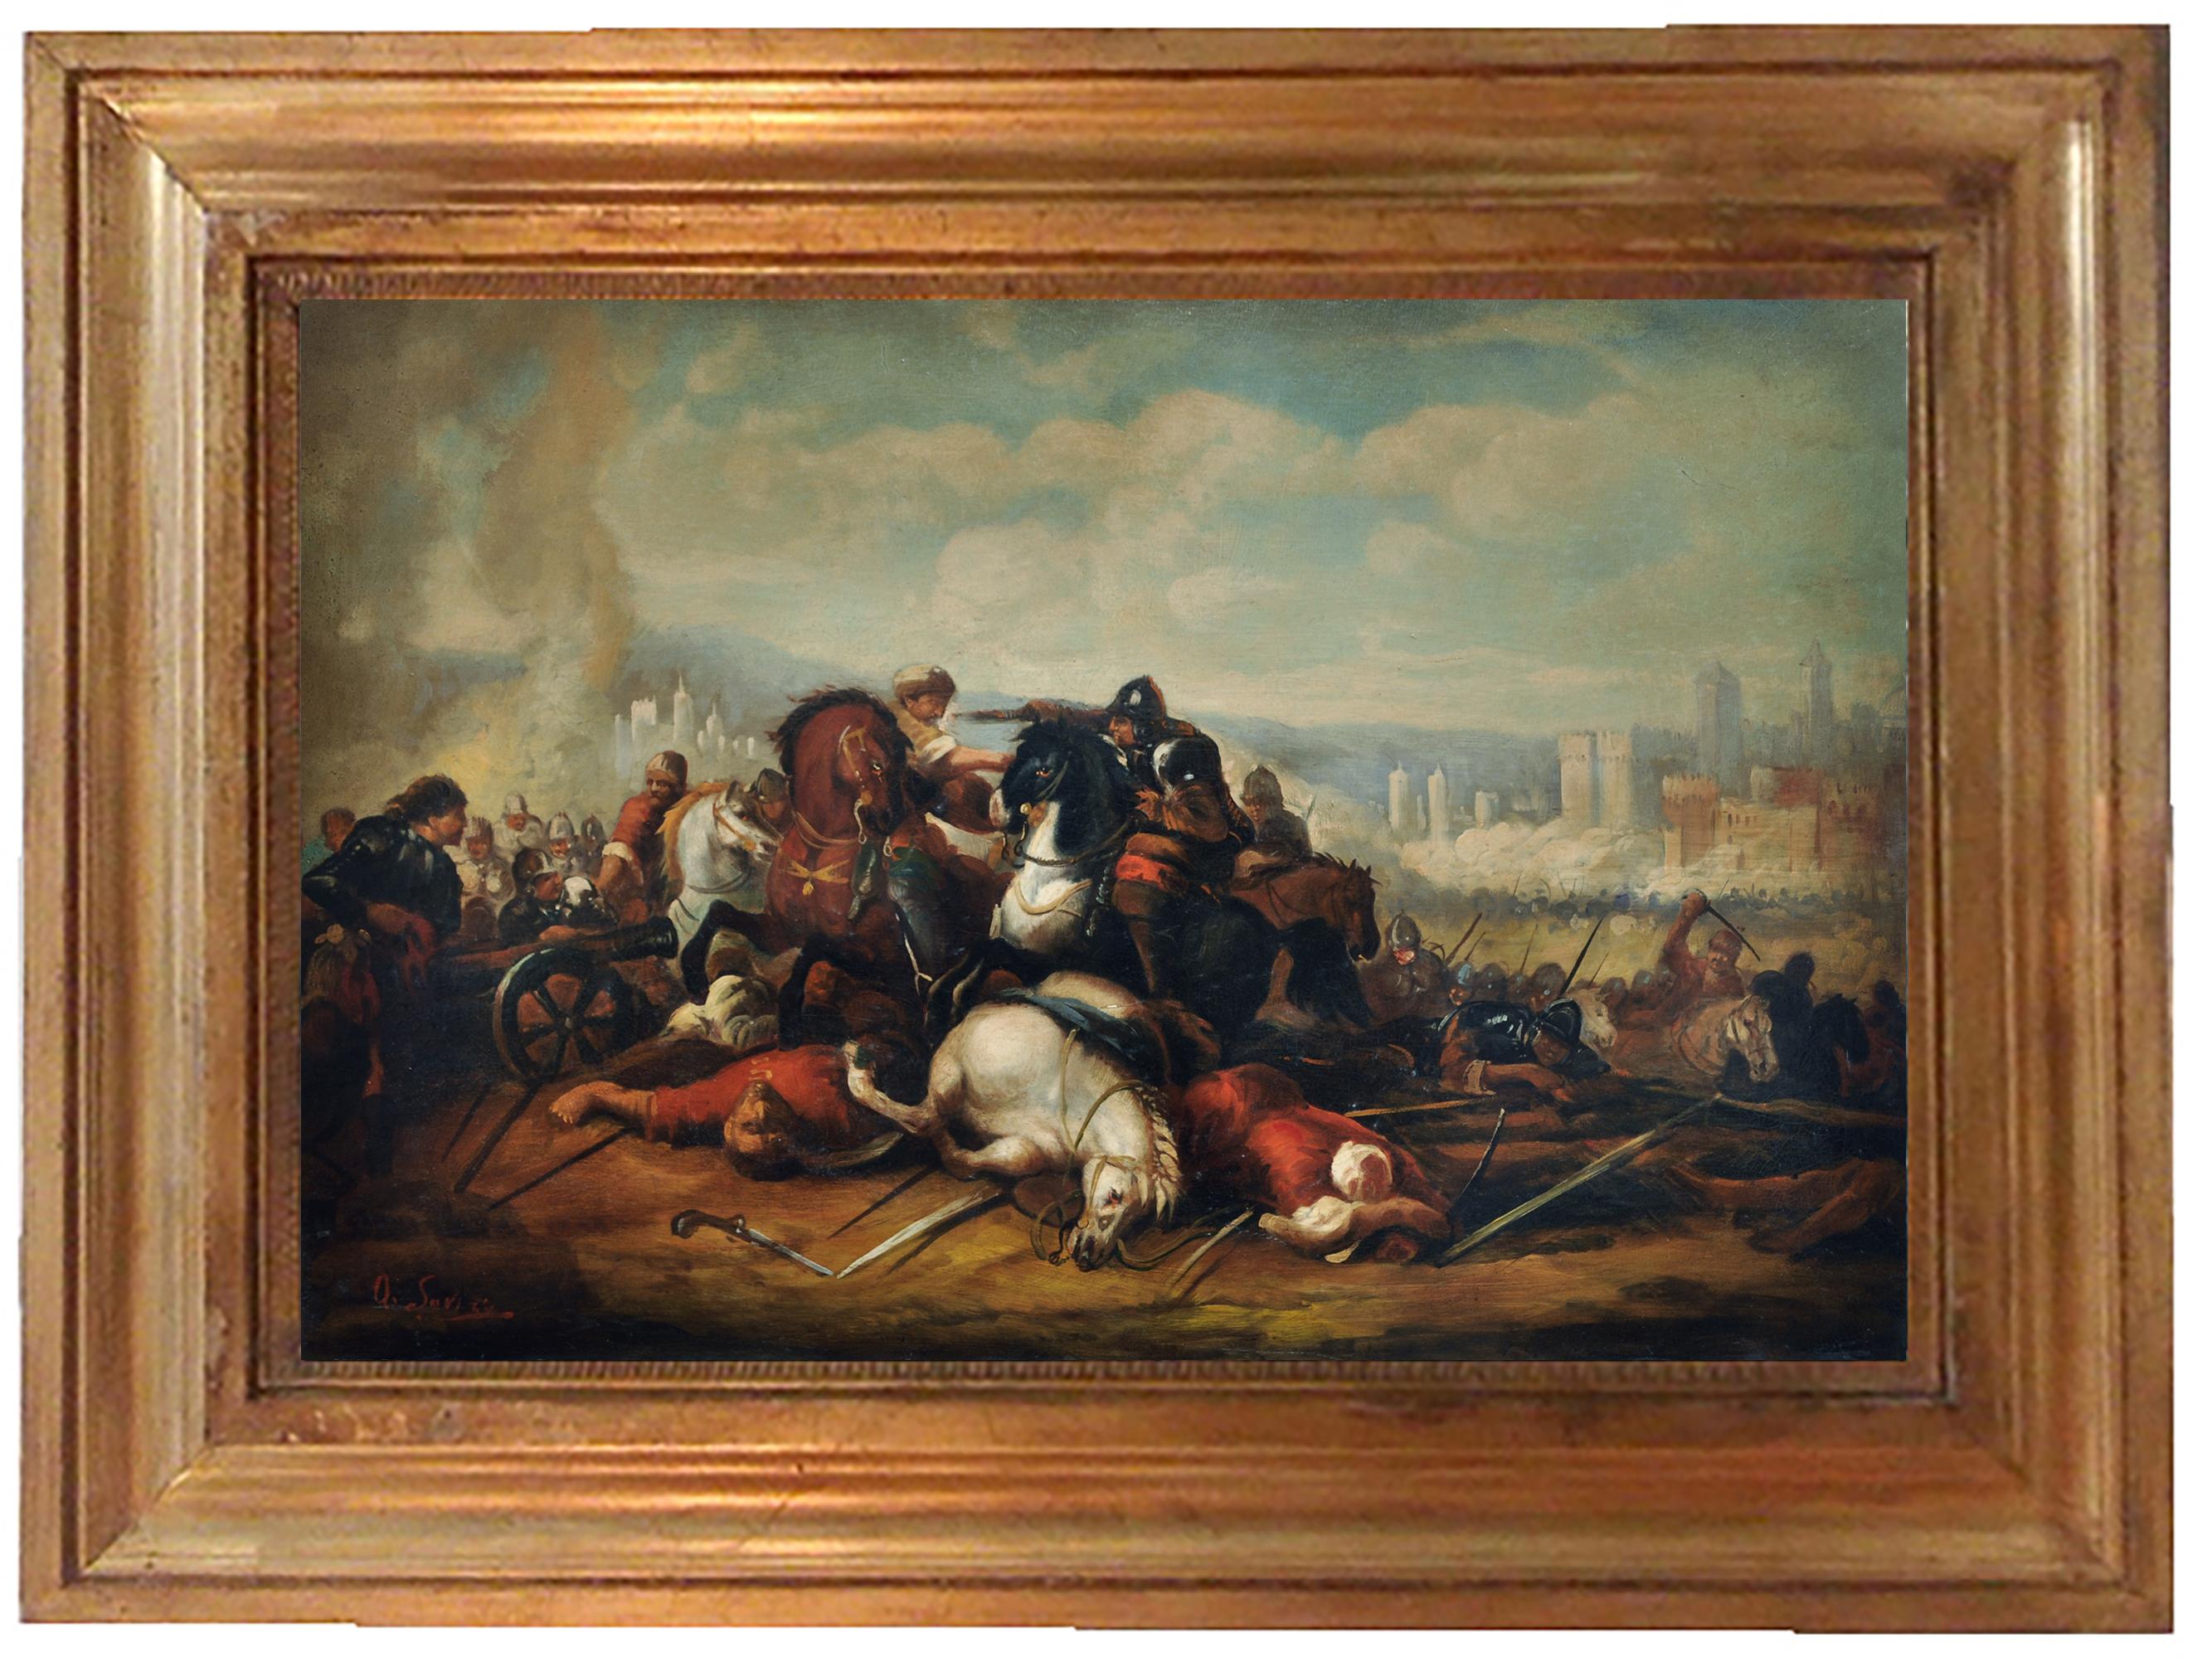 Land battle - Antonio Savisio Italia 2005 - Oil on canvas cm.40x60
Frame available on request from our workshop.